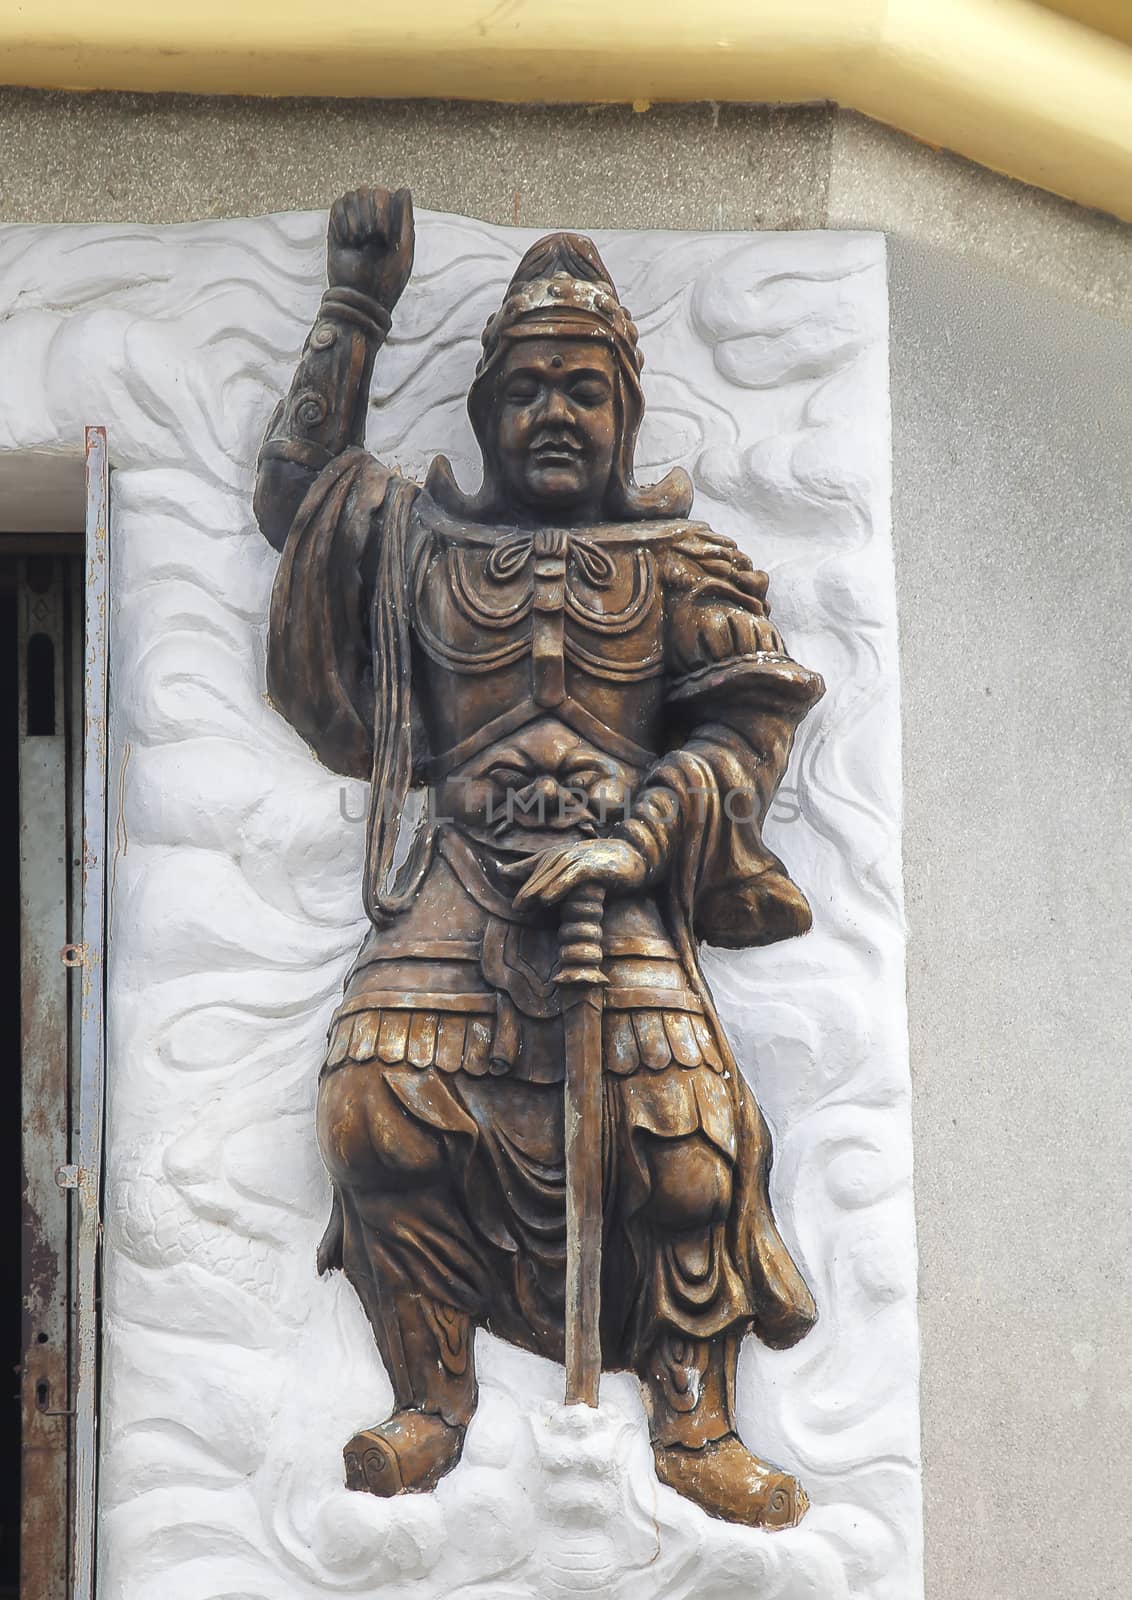 Warrior relief at the entrance of a Buddhist temple, Vietnam